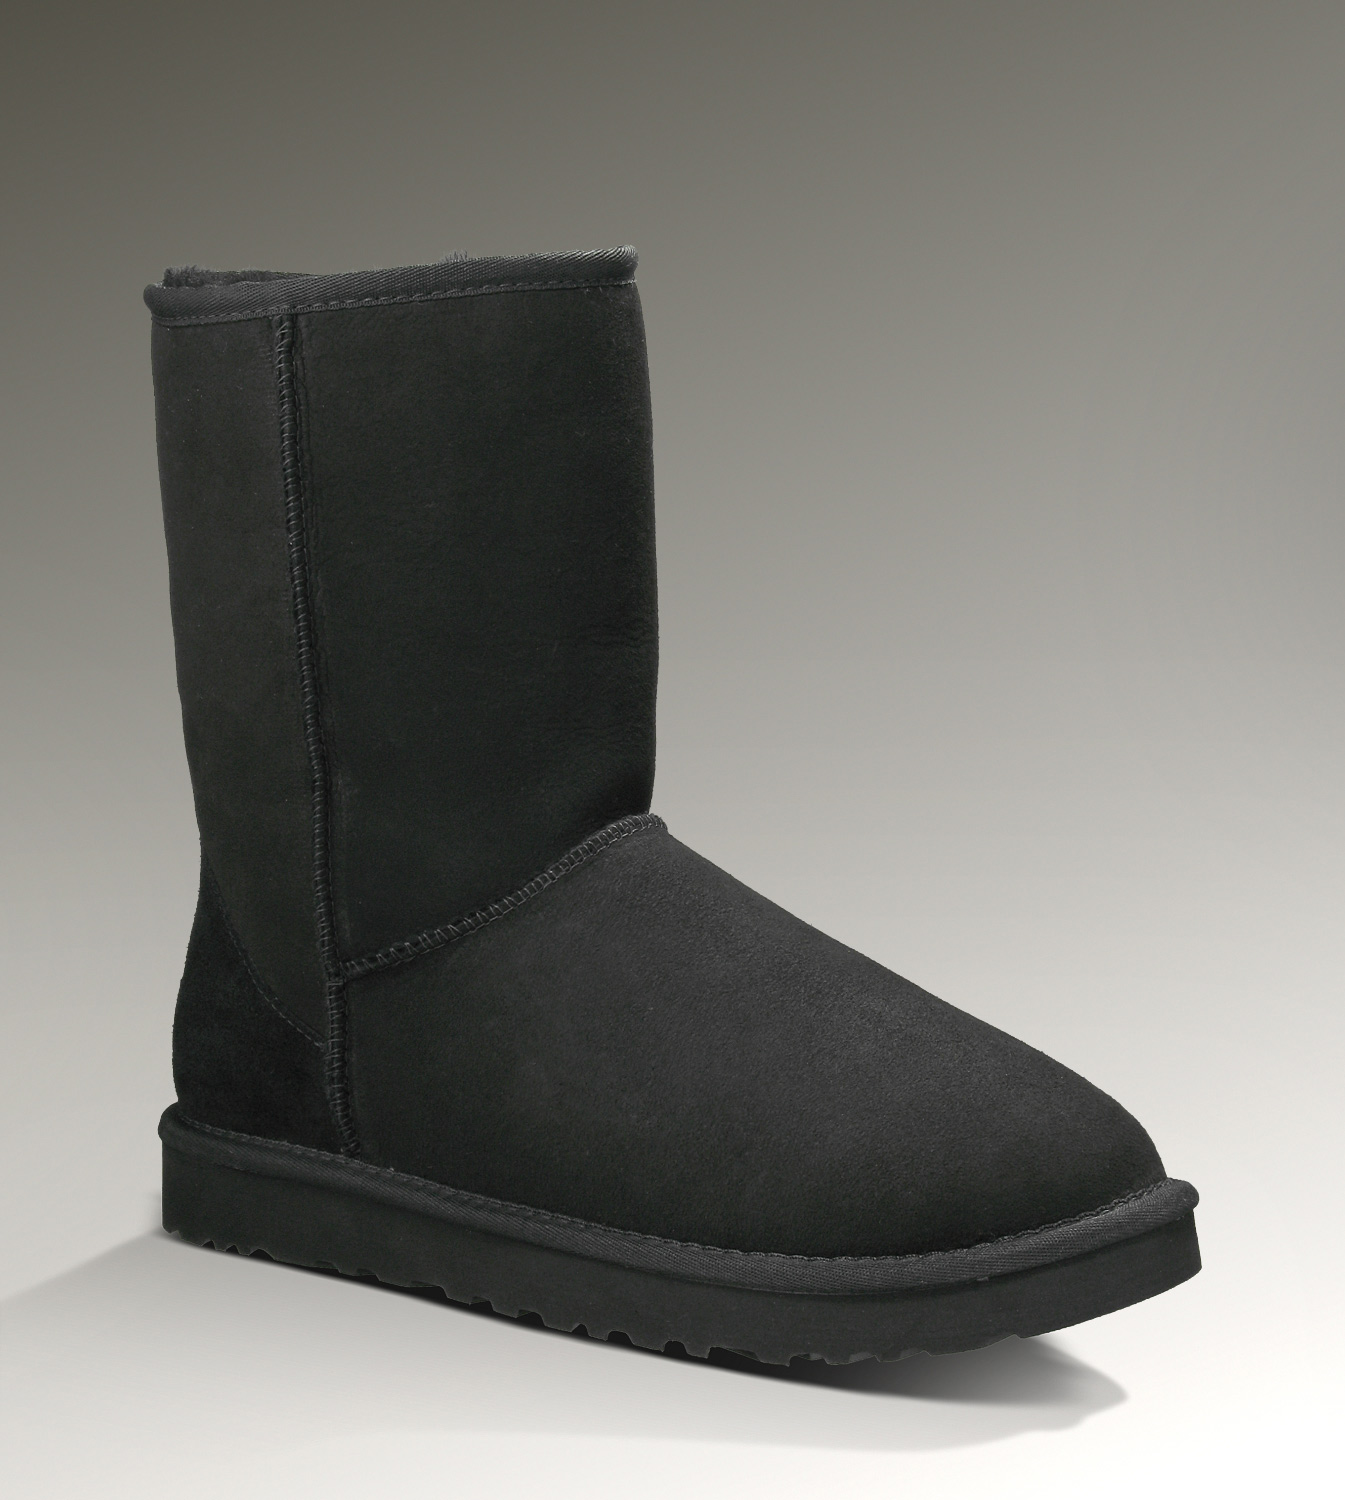 Ugg Outlet Classic Short Black Boots 140257